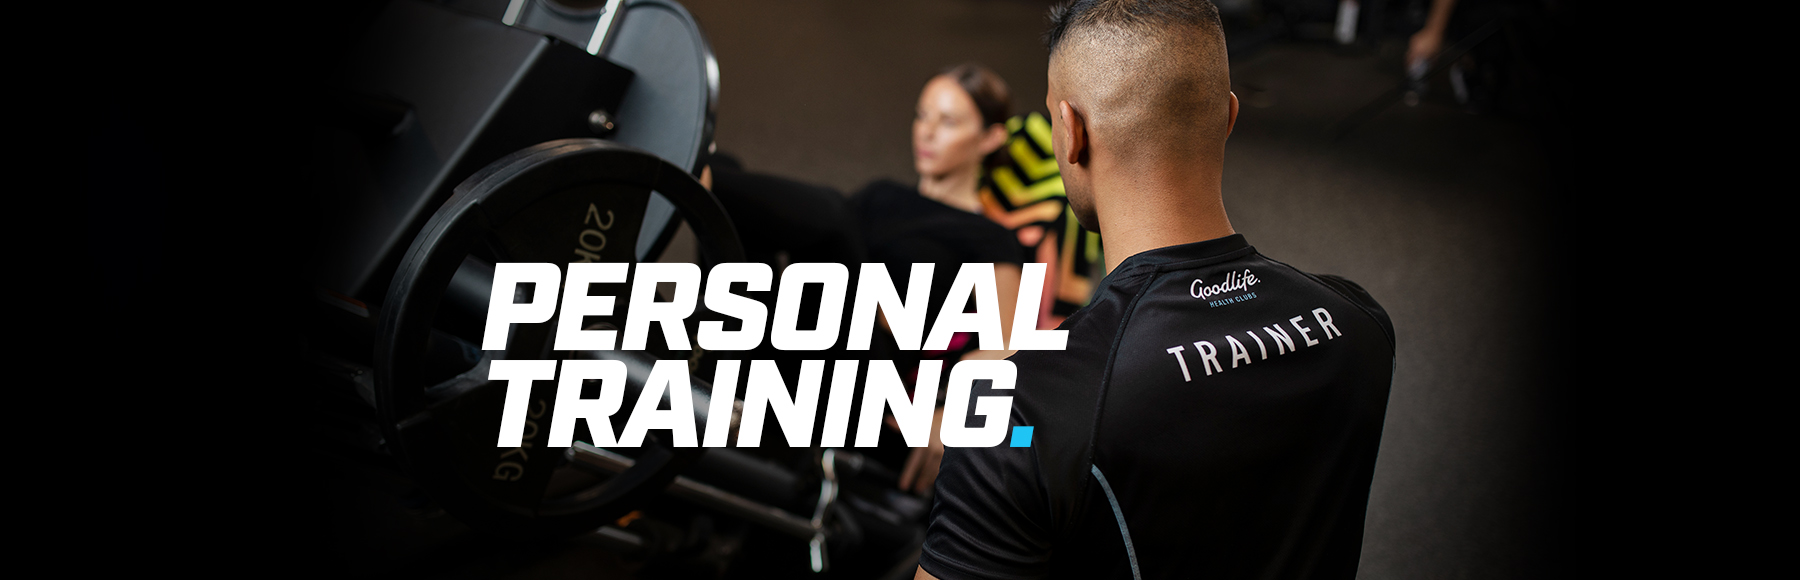 Find a Personal Trainer - Goodlife Health Clubs